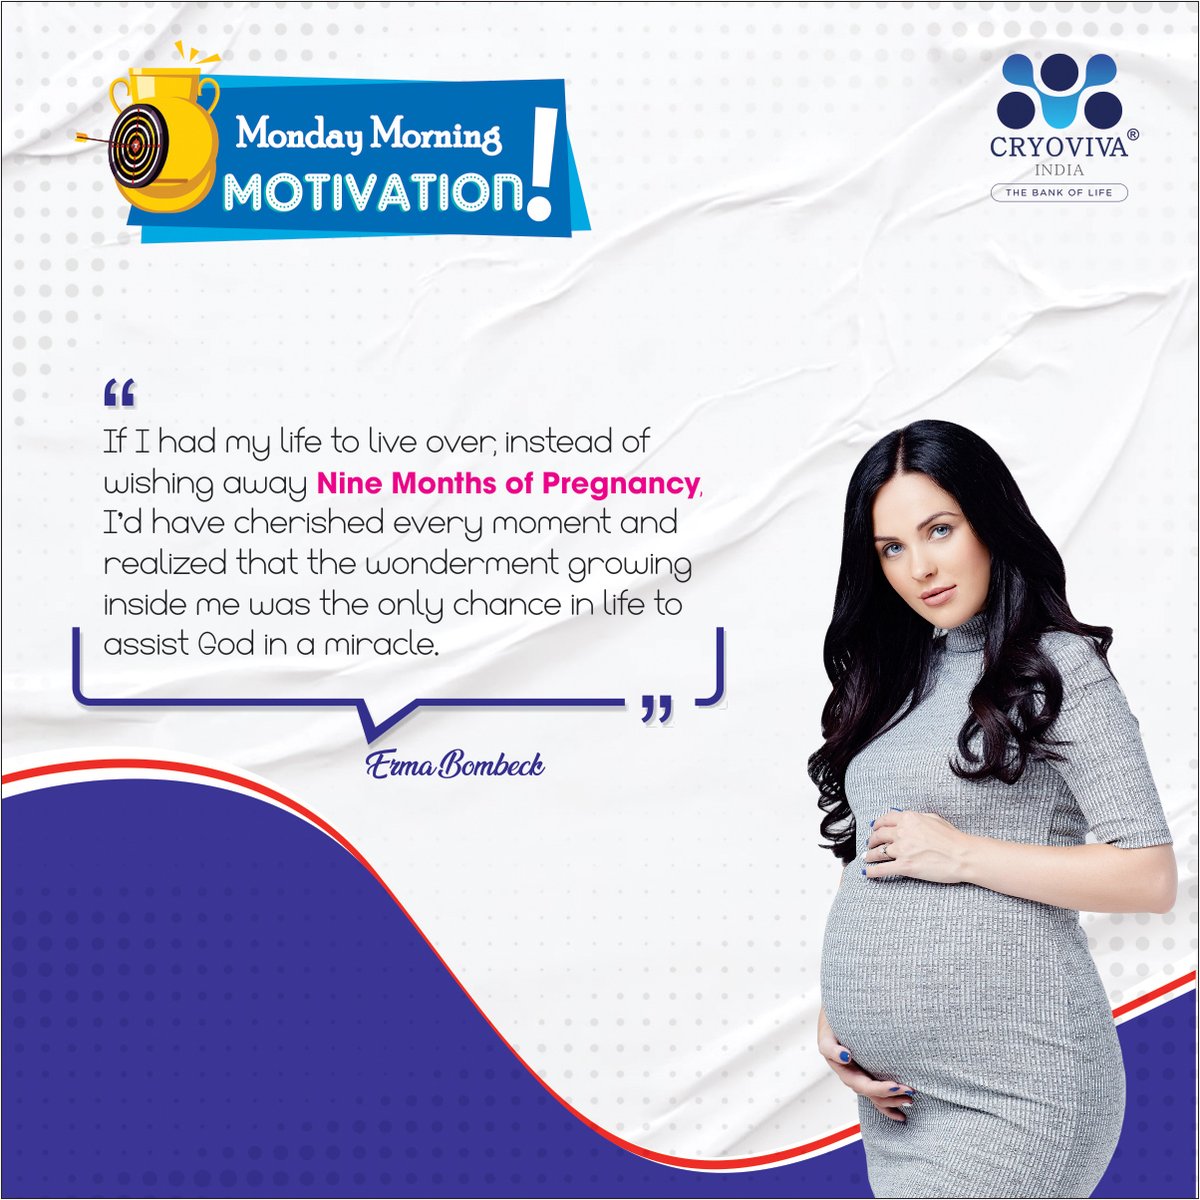 It is never easy to be pregnant. Moms-to-be will go through many changes, both physically & mentally, with some journeys being more difficult than others. Nonetheless, many pregnant women find it amazing.
#mondaymotivation #pregnancymotivation #cordbloodbanking #stemcellbanking